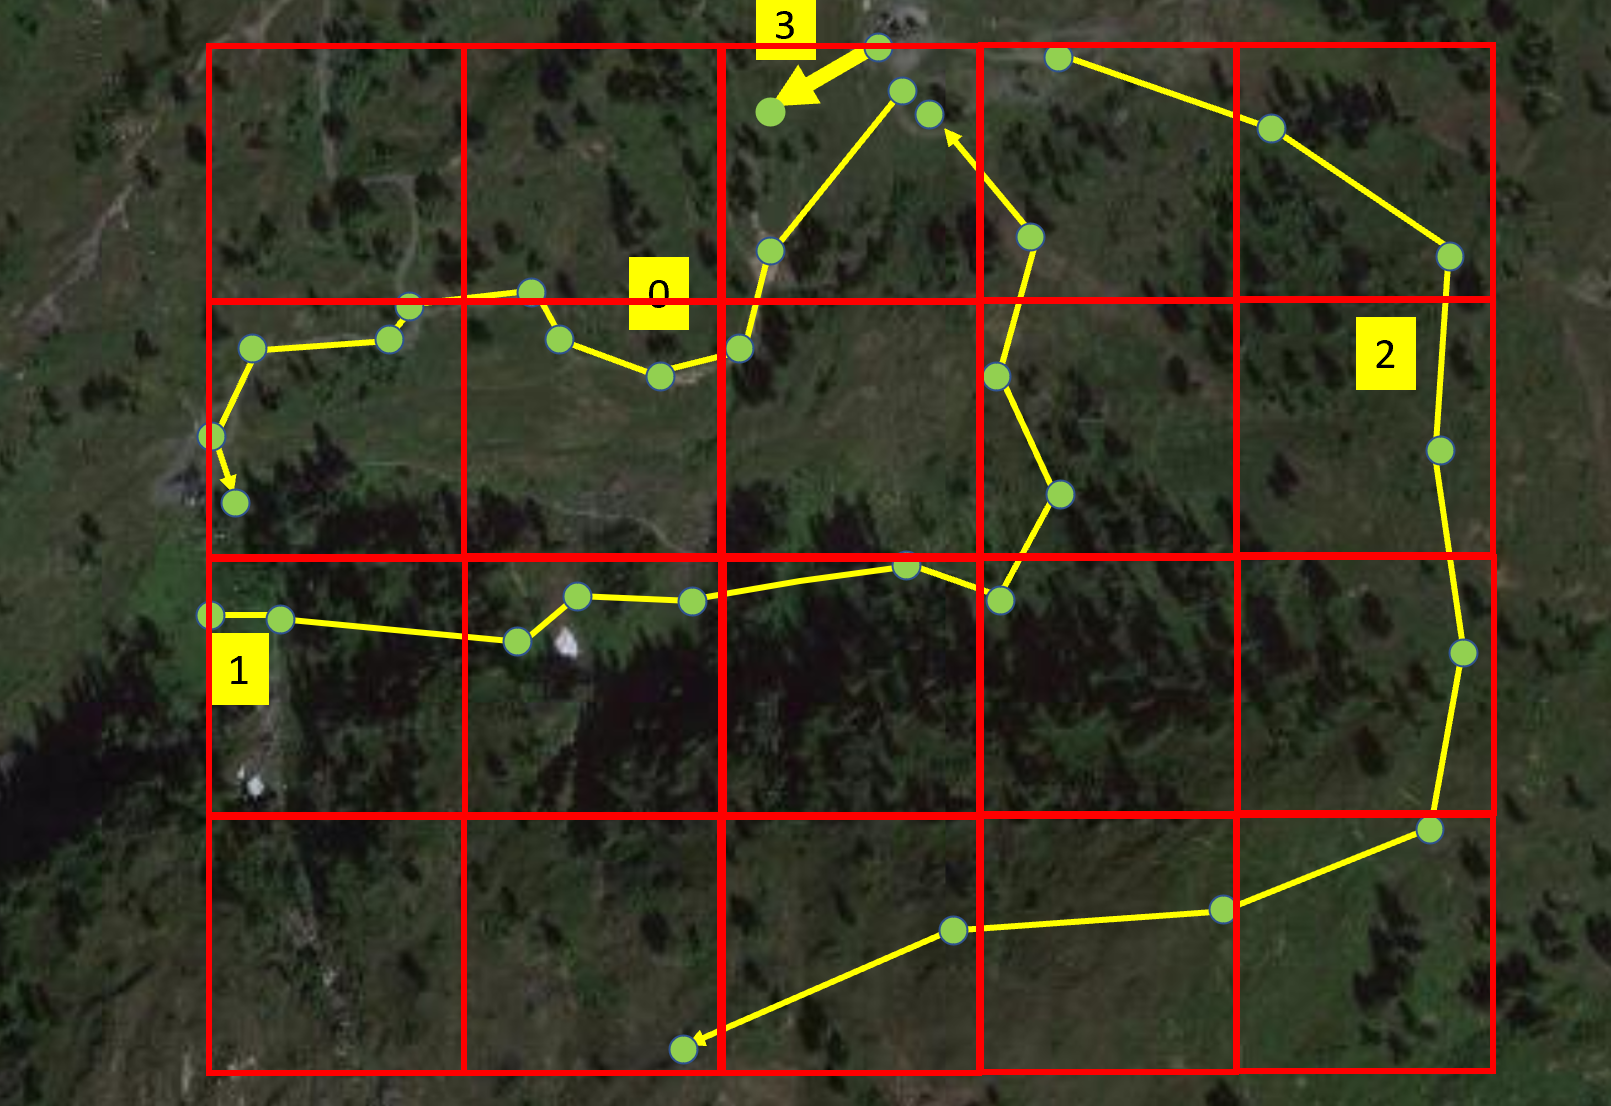 a grid over the track with cell borders at x=0.0,1.0,2.0,3.0,4.0,5.0 and y=0.0,1.0,2.0,3.0